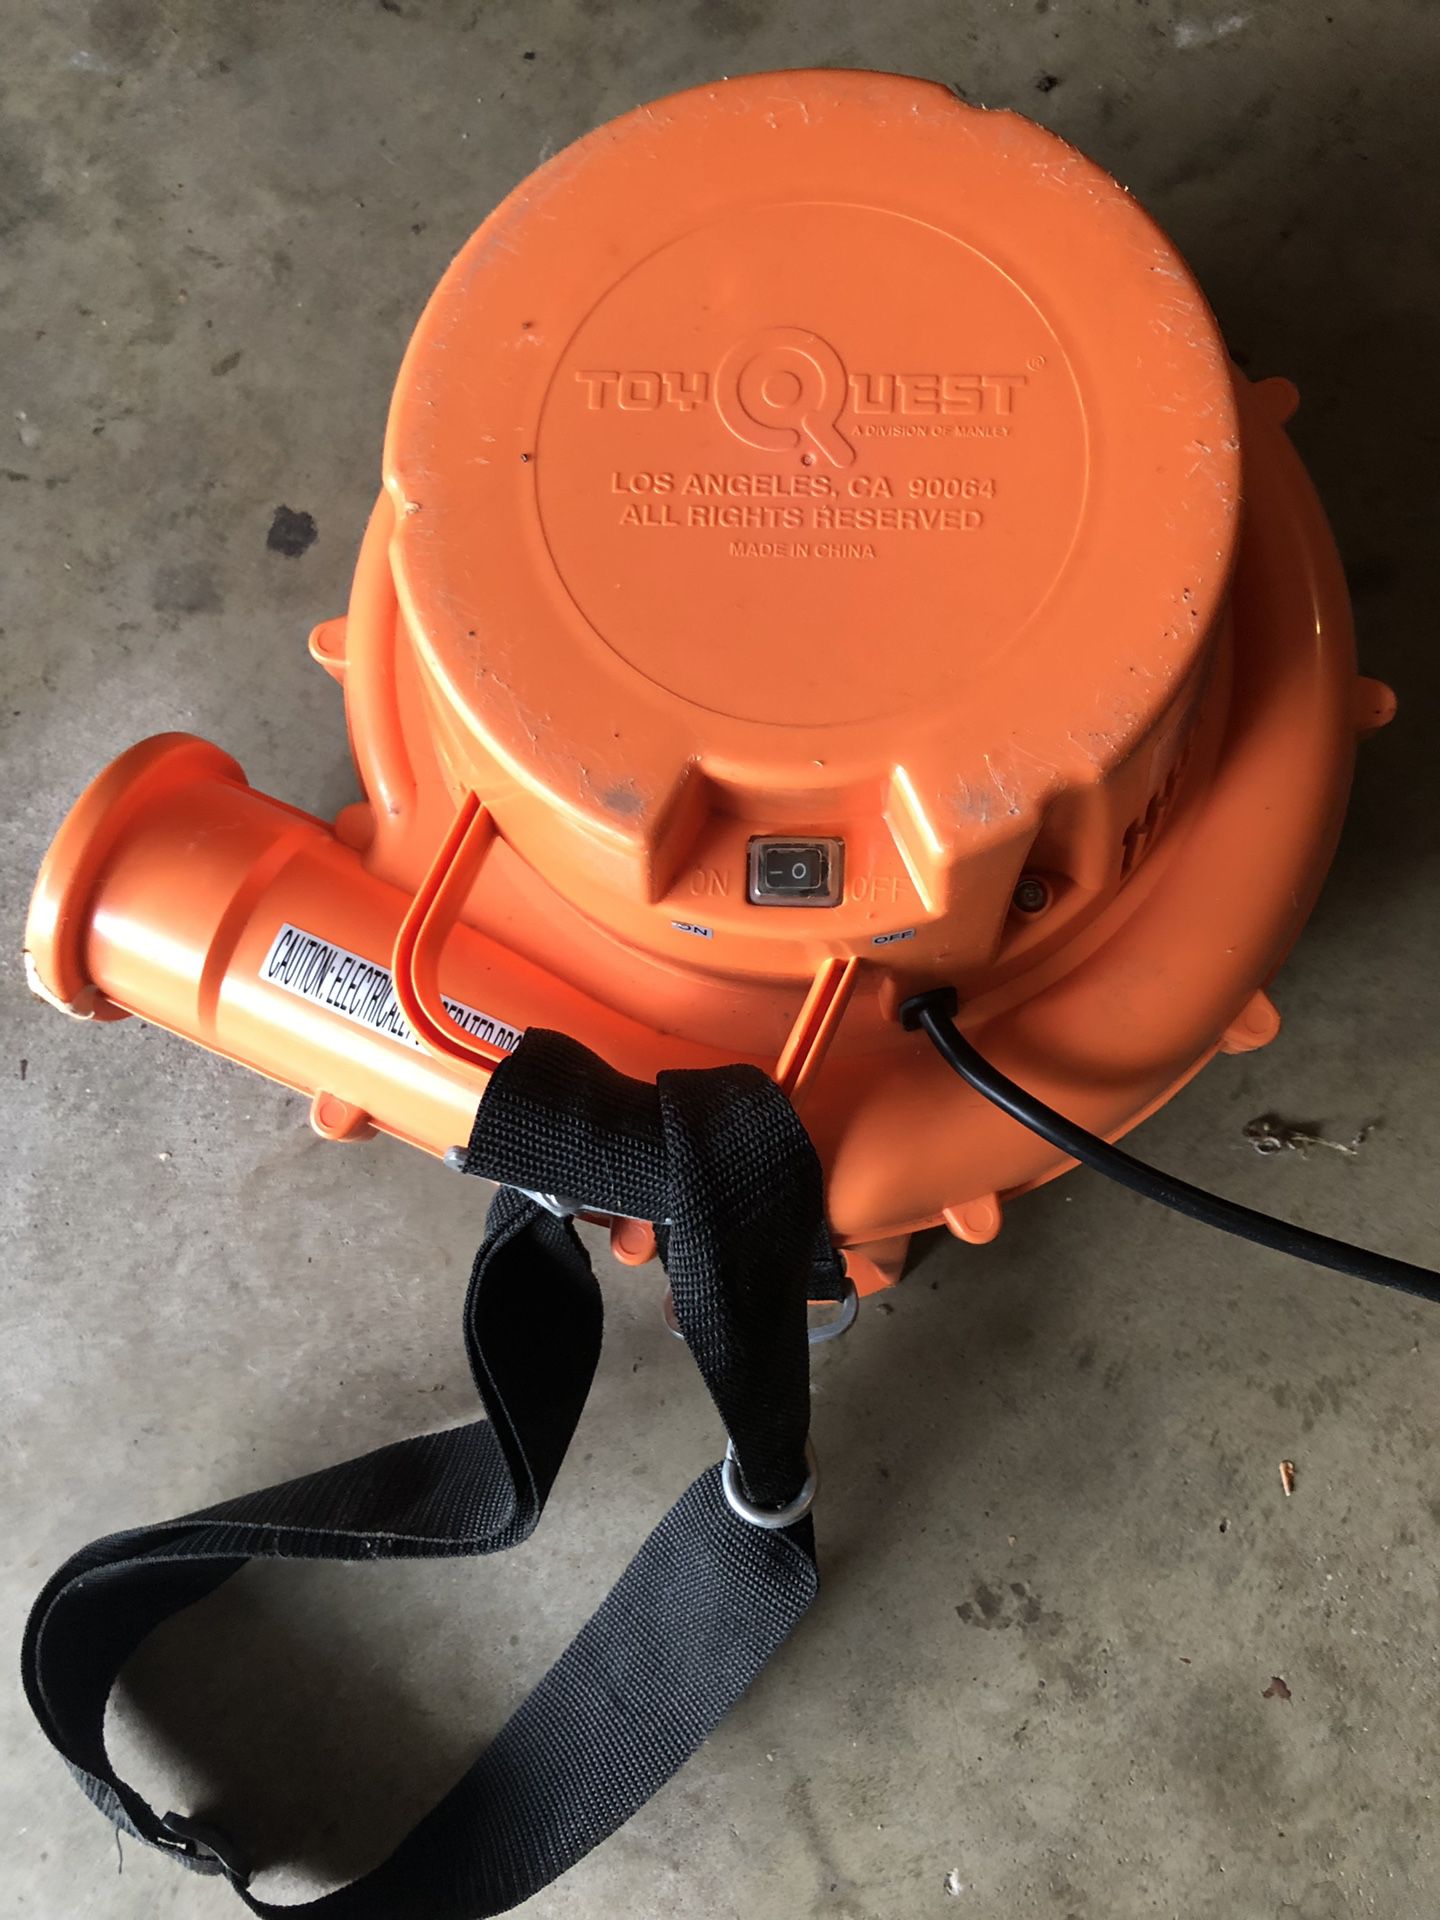 Toy Quest blower for bounce house or water slide